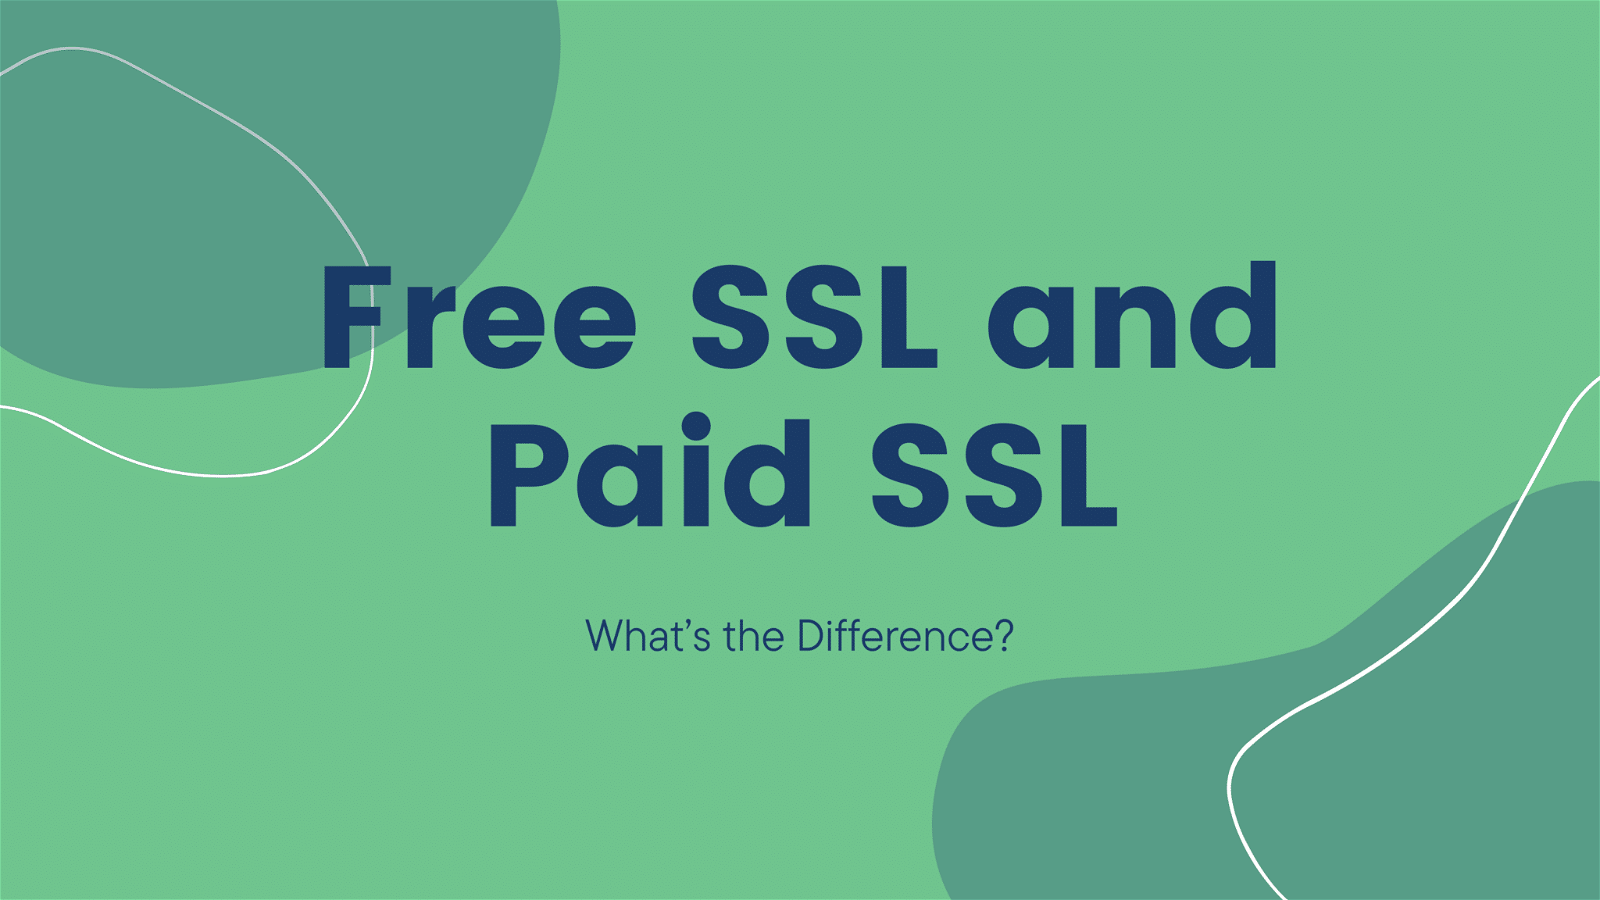 This image is comparing the differences between free and paid SSL certificates.